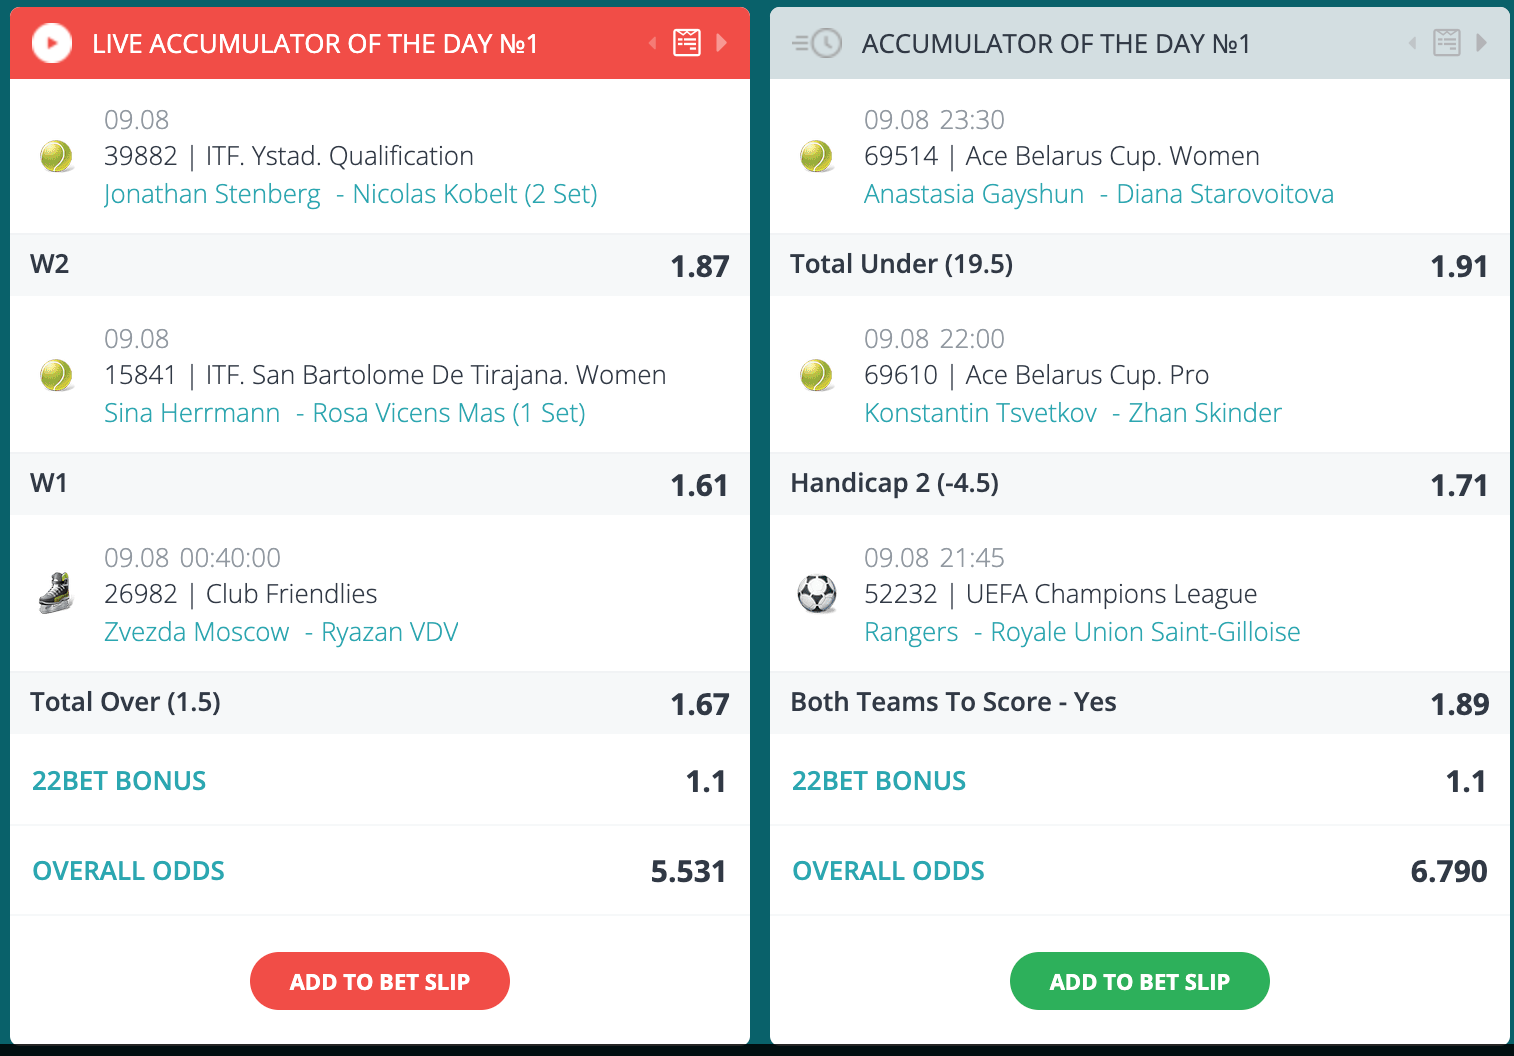 Image showing 22bet Live Accumulator and accumulator of the day free super tips that gamers can add to their betslip